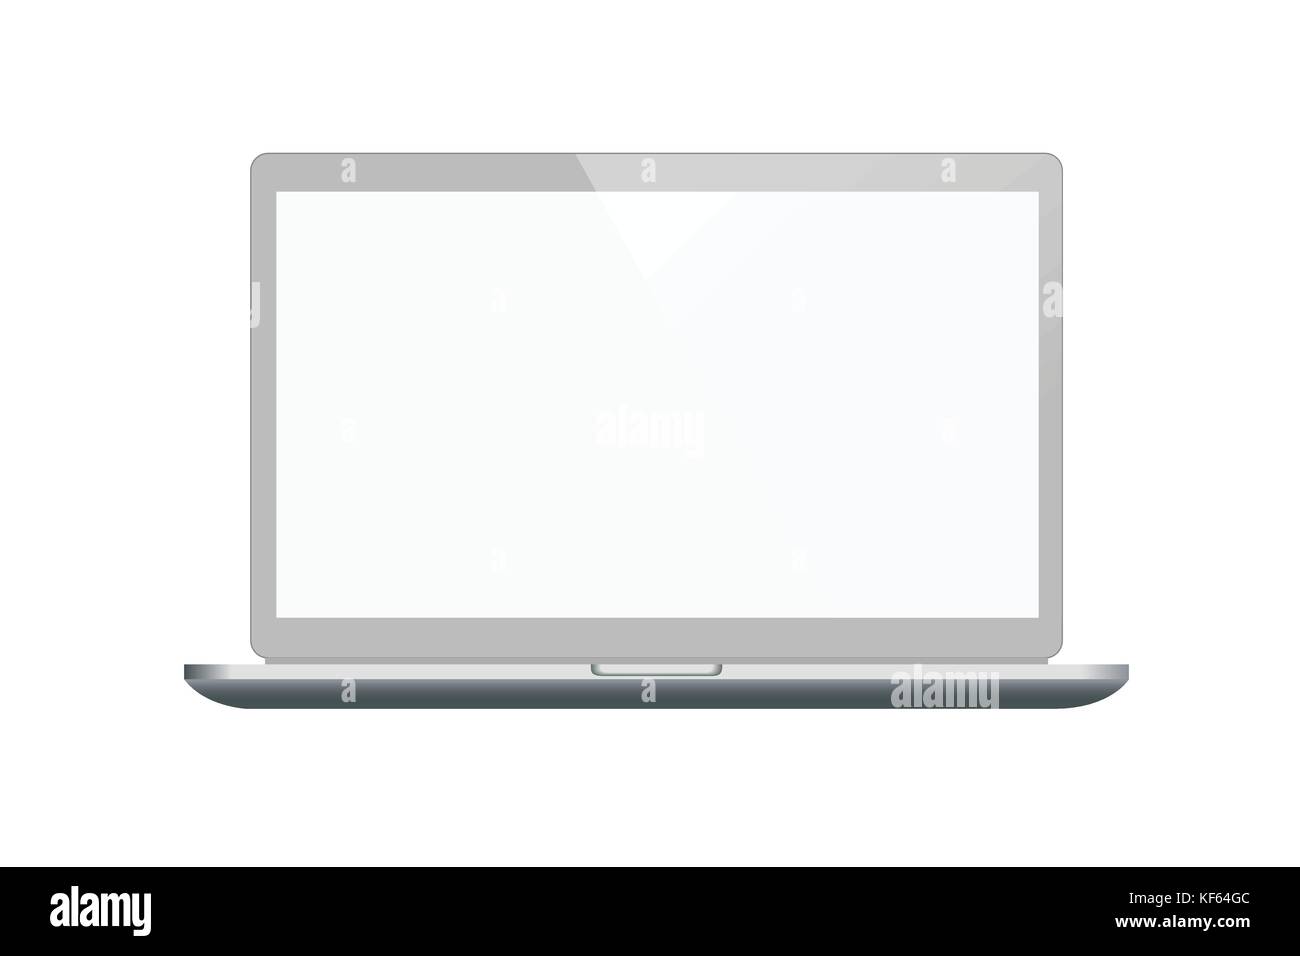 Realistic vector illustration of metal silver laptop with open blank display isolated on white background Stock Vector